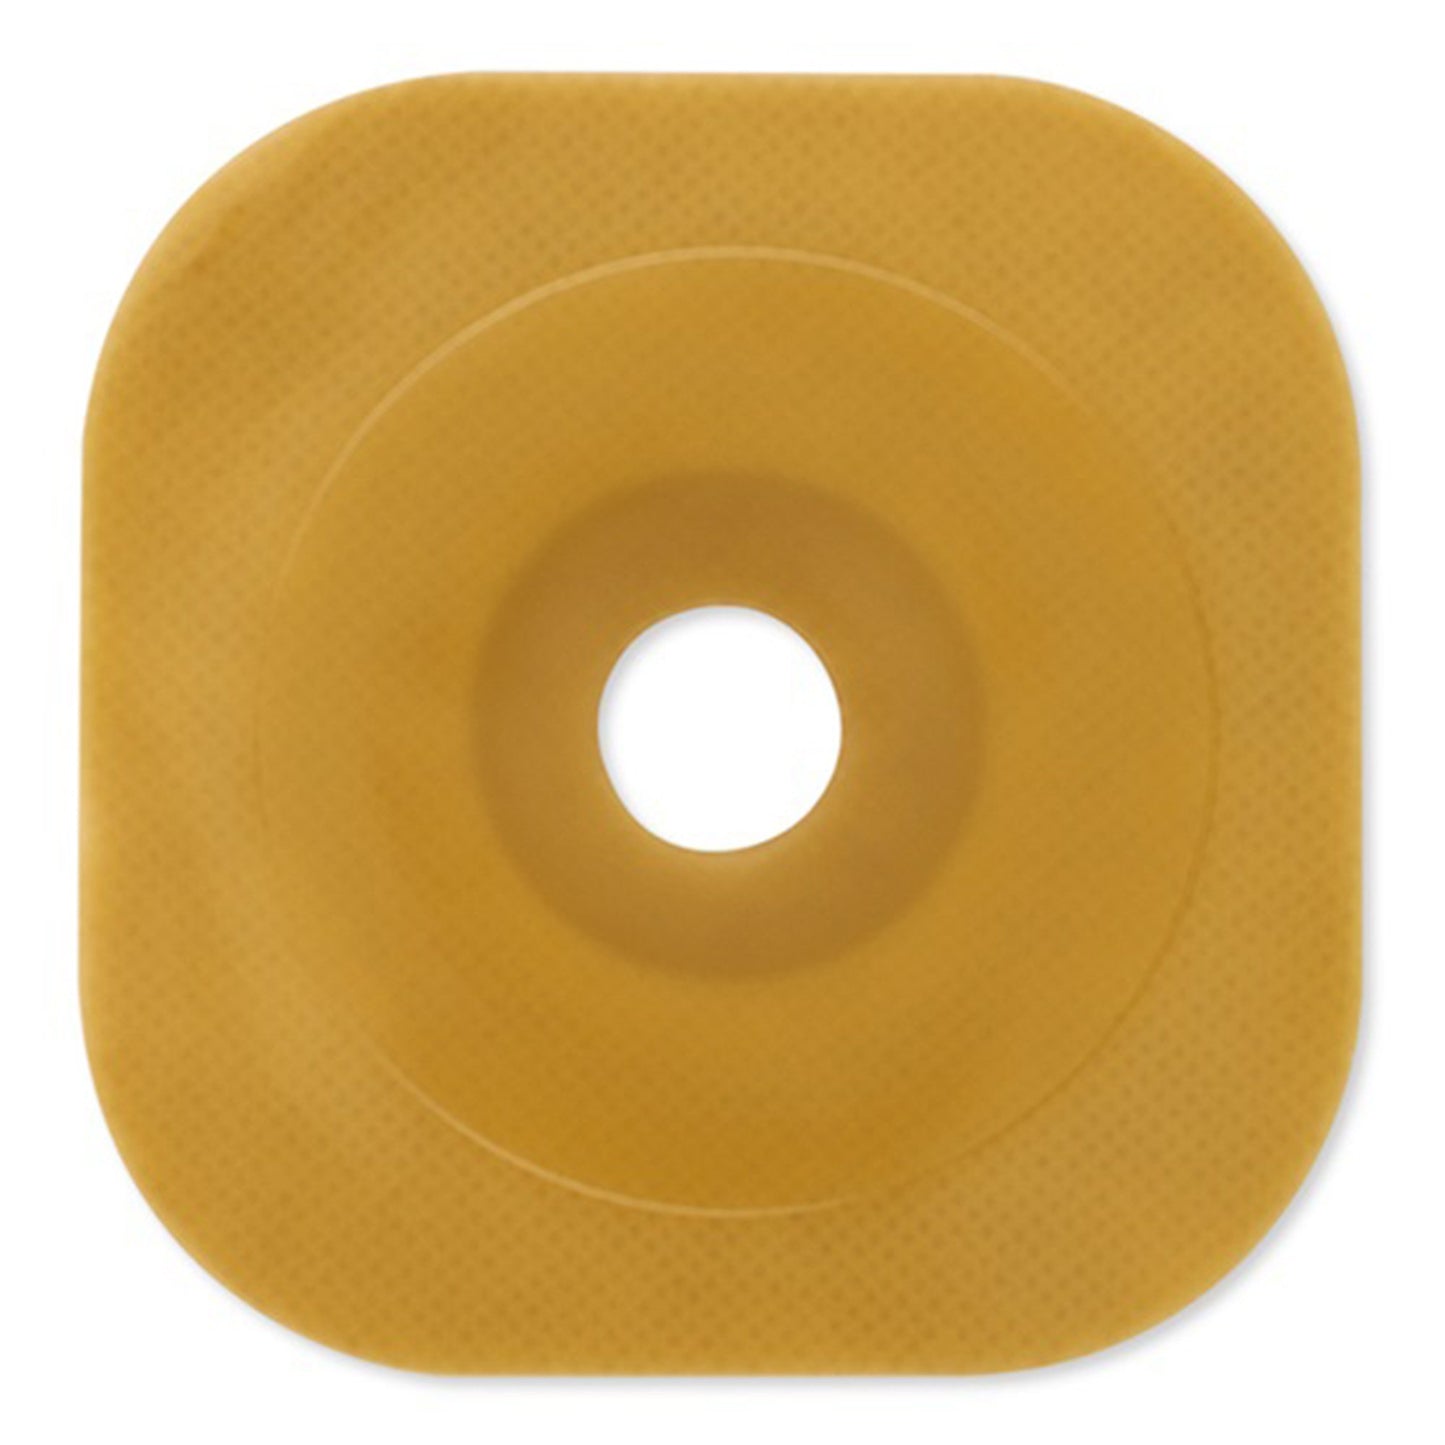 FlexWear™ Colostomy Barrier With Up to 2.25 Inch Stoma Opening, 5 ct